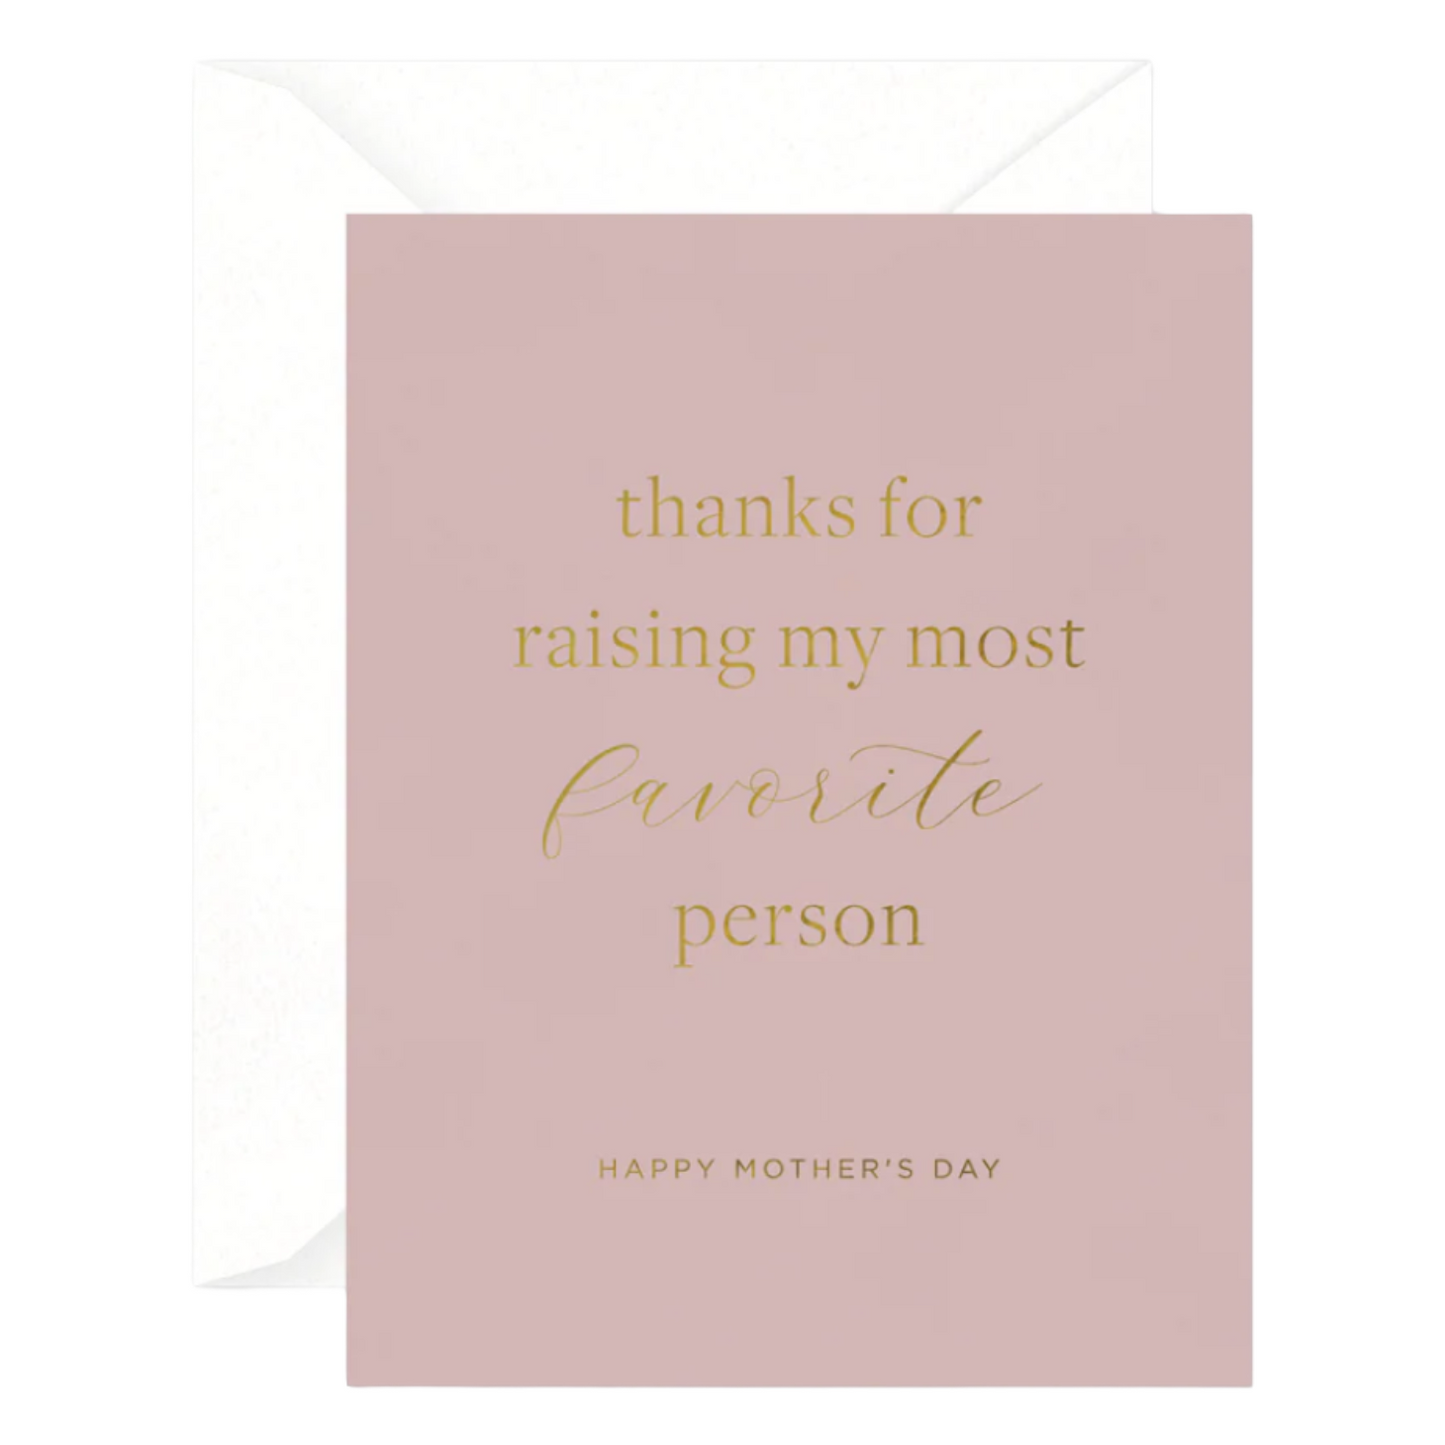 Favorite Person Card by Smitten On Paper